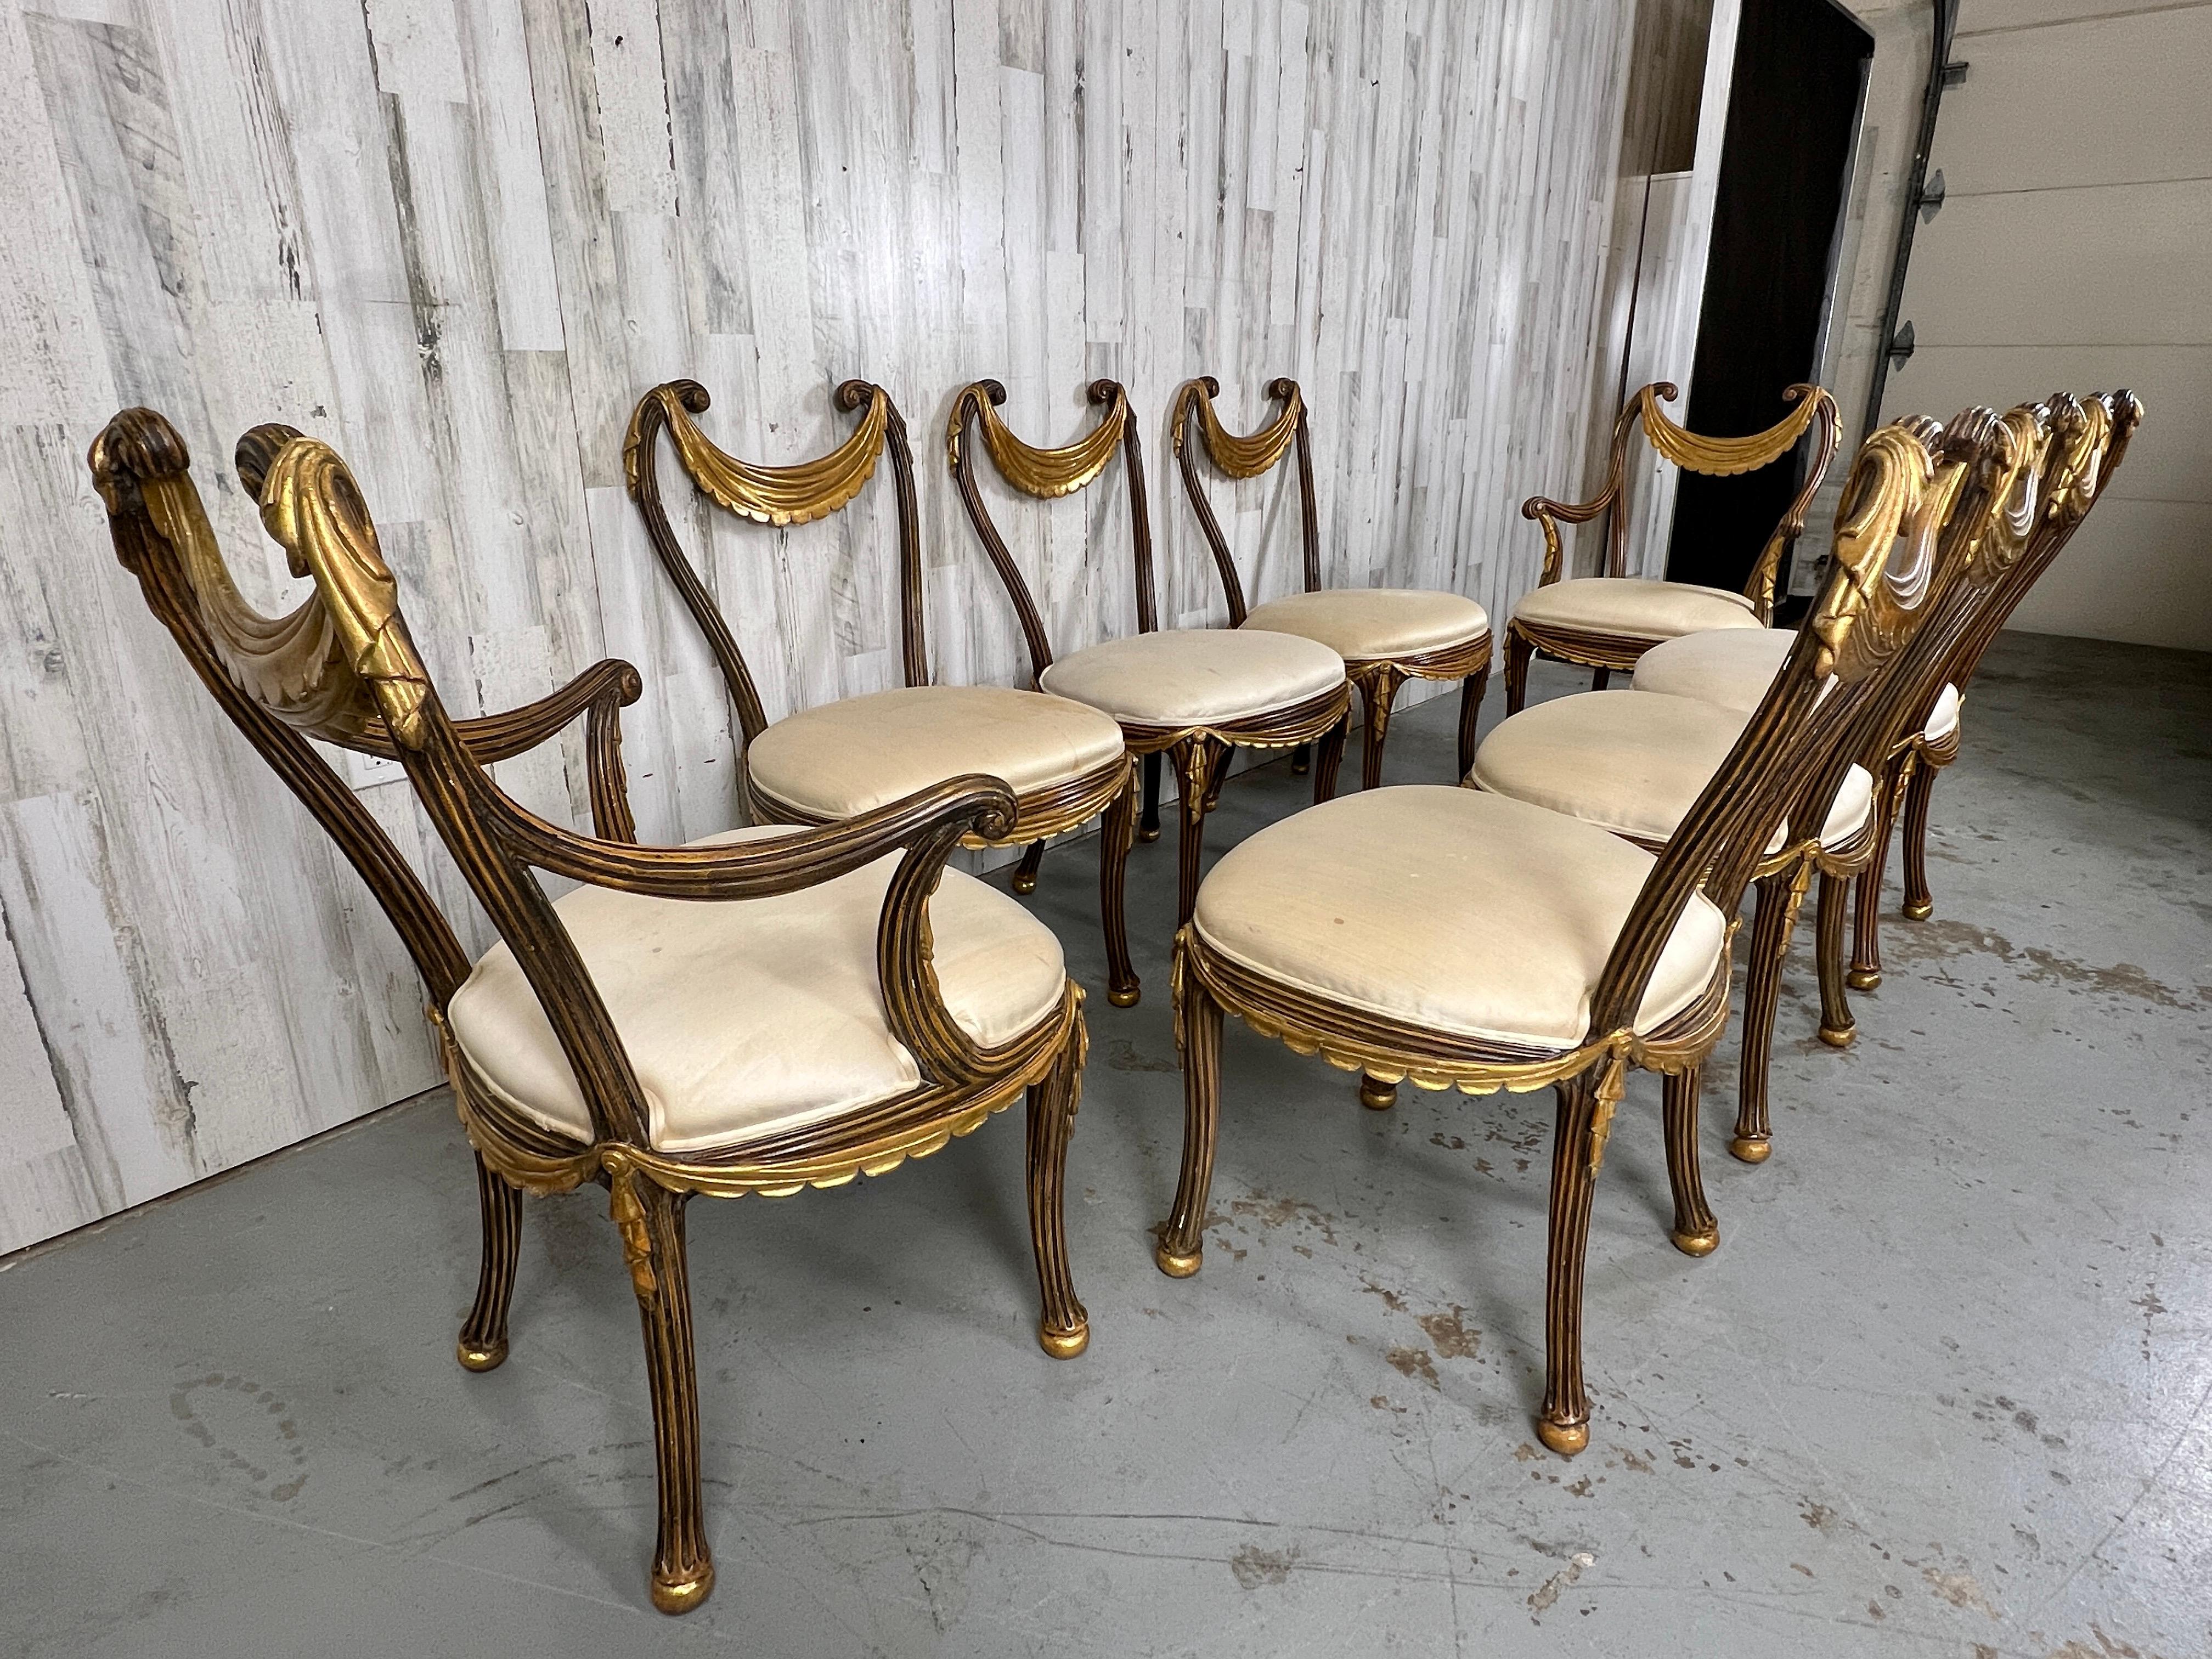 1930s Italian Partial Gilt Dining Chairs In Good Condition For Sale In Denton, TX